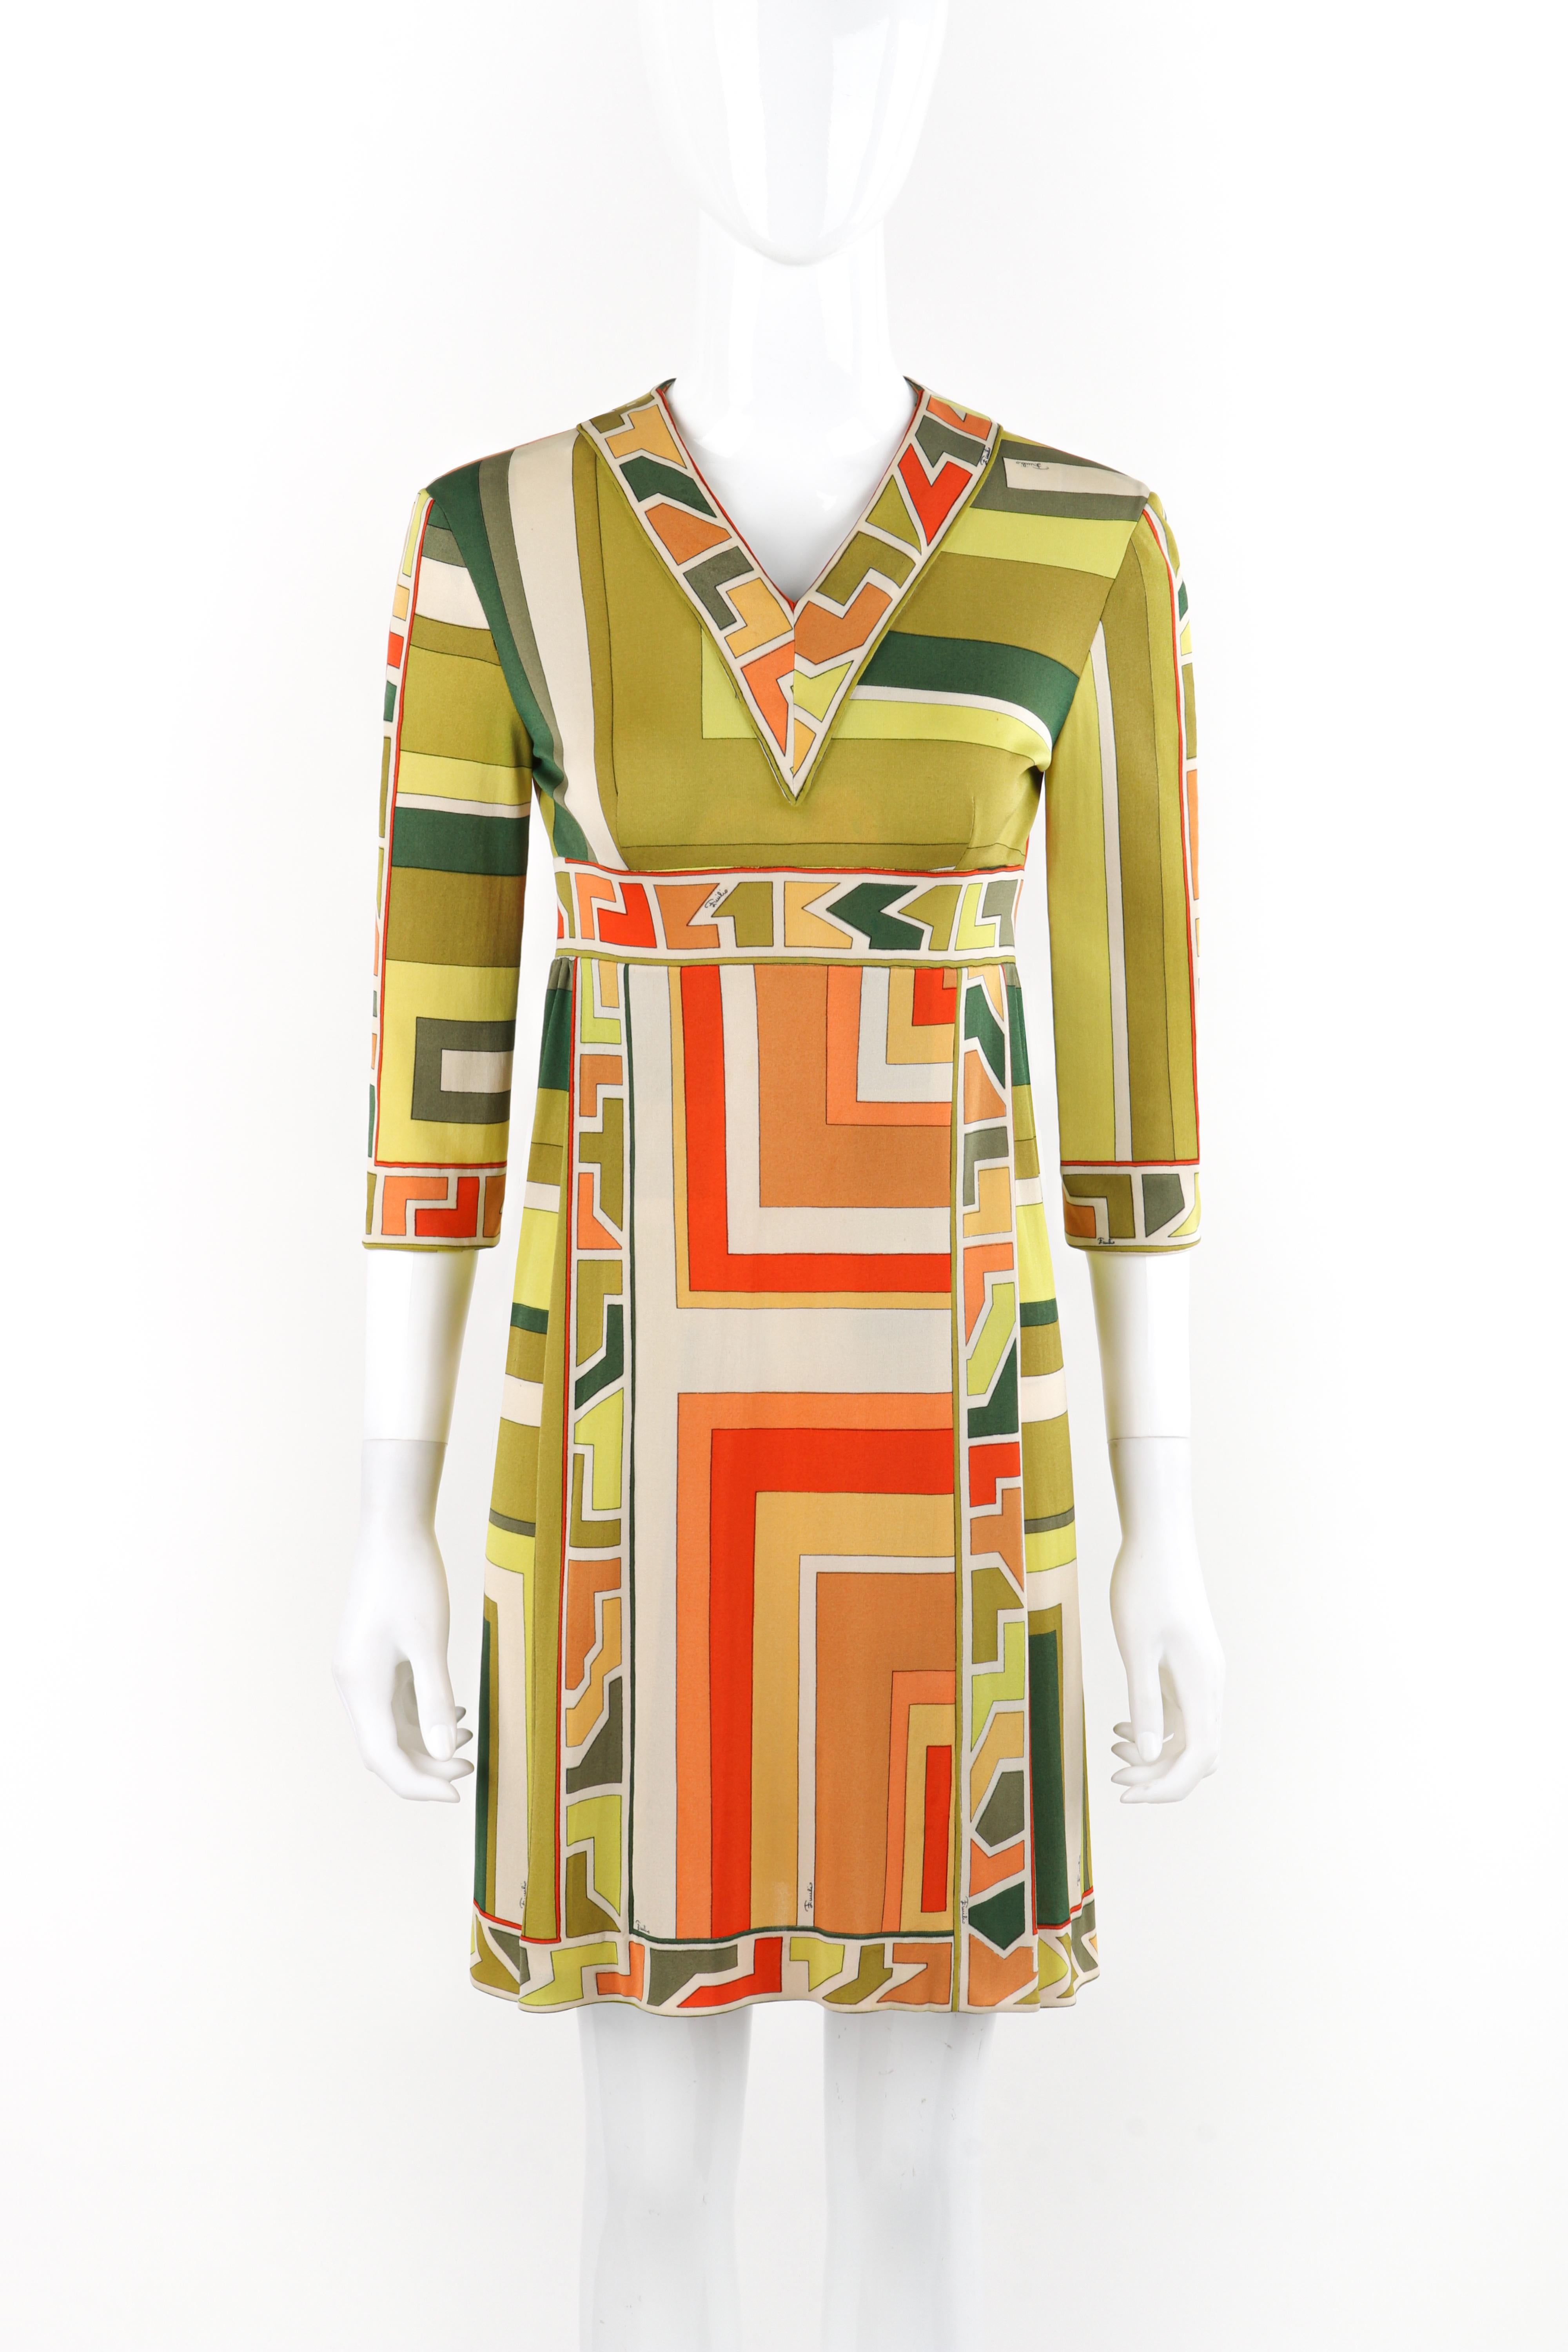 Brand / Manufacturer: Emilio Pucci 
Circa: 1960s
Designer: Emilio Pucci 
Style: Knee-length dress
Color(s): Shades of green, orange, yellow, white, black
Lined: No
Marked Fabric Content: 